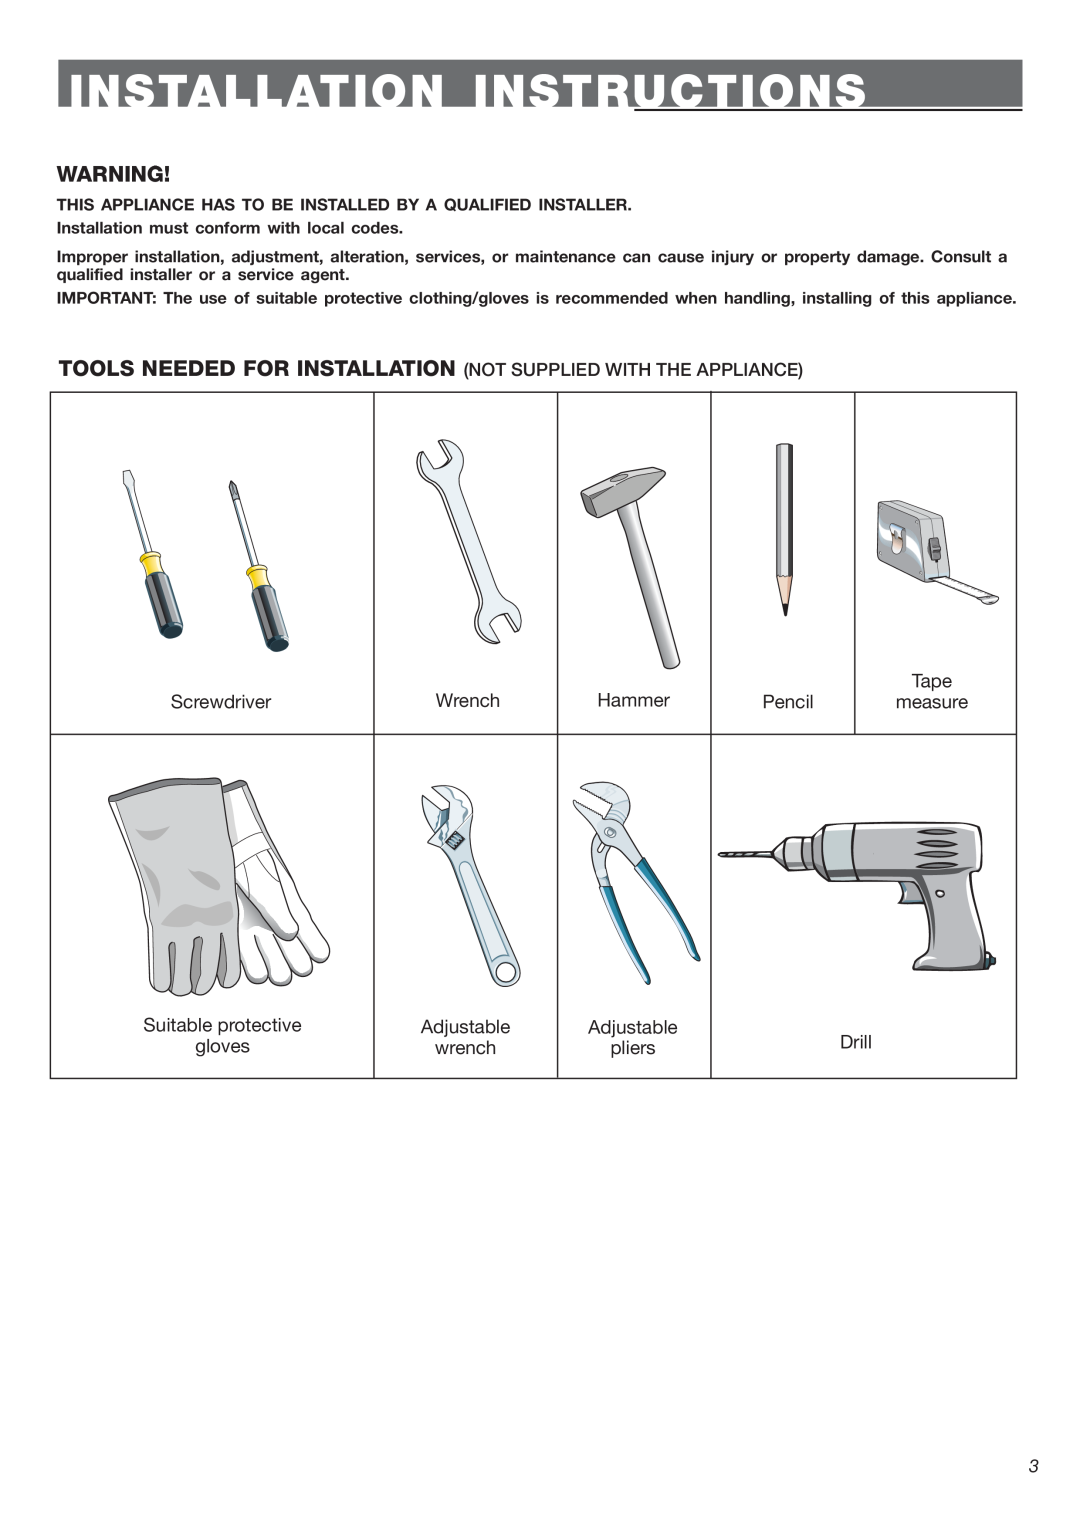 DeLonghi DEGLSC 24 SS Installation Instructions, Screwdriver, Wrench, Hammer, Pencil, Tape measure, Adjustable wrench 